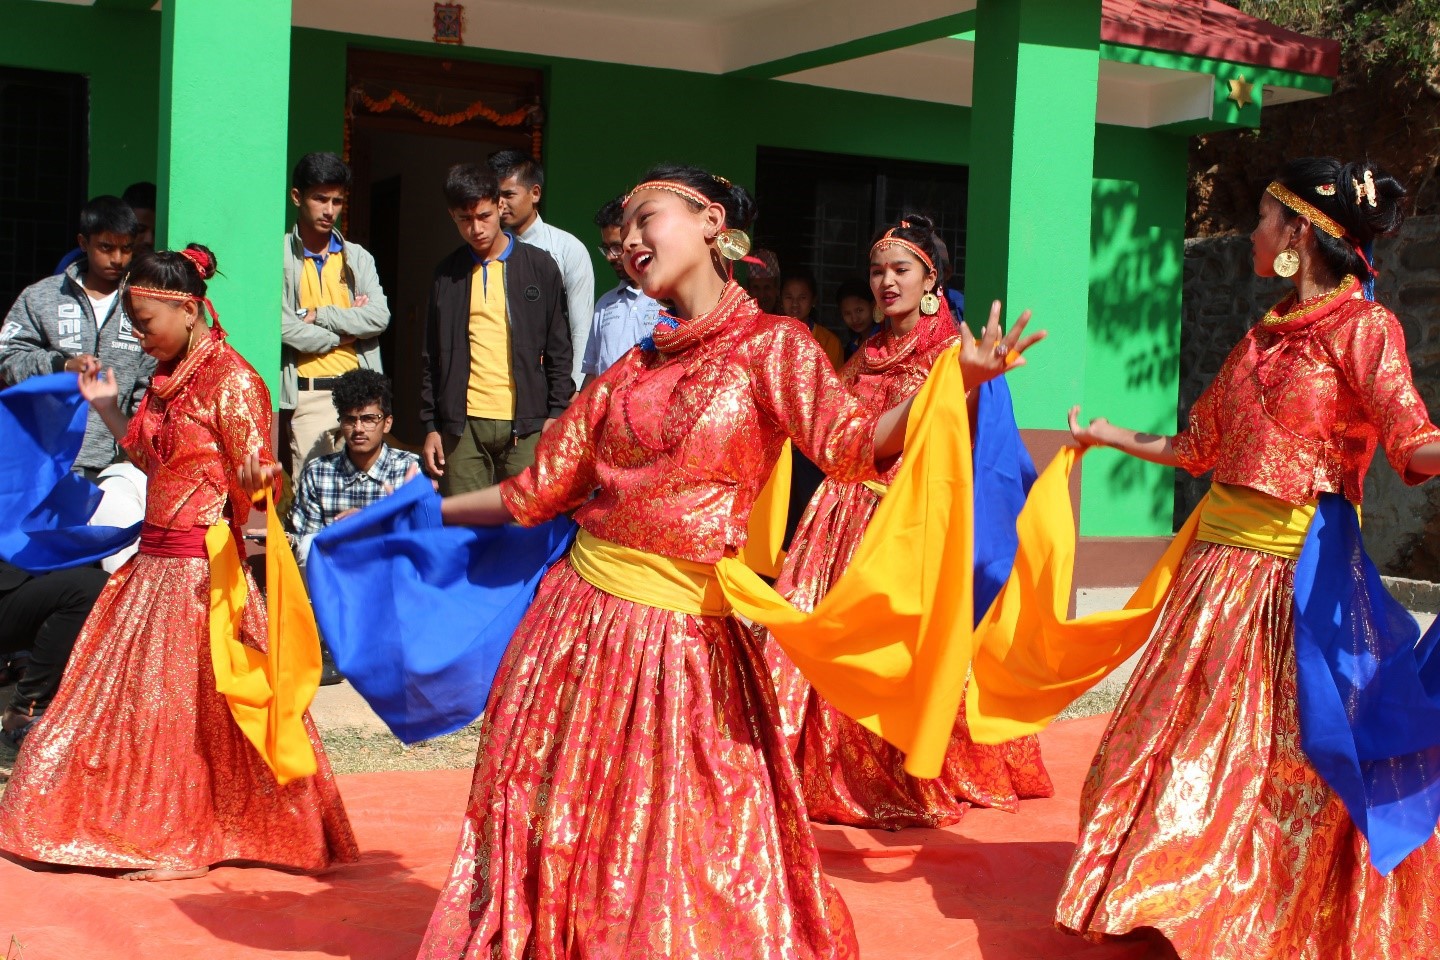 Nepalese youth dance